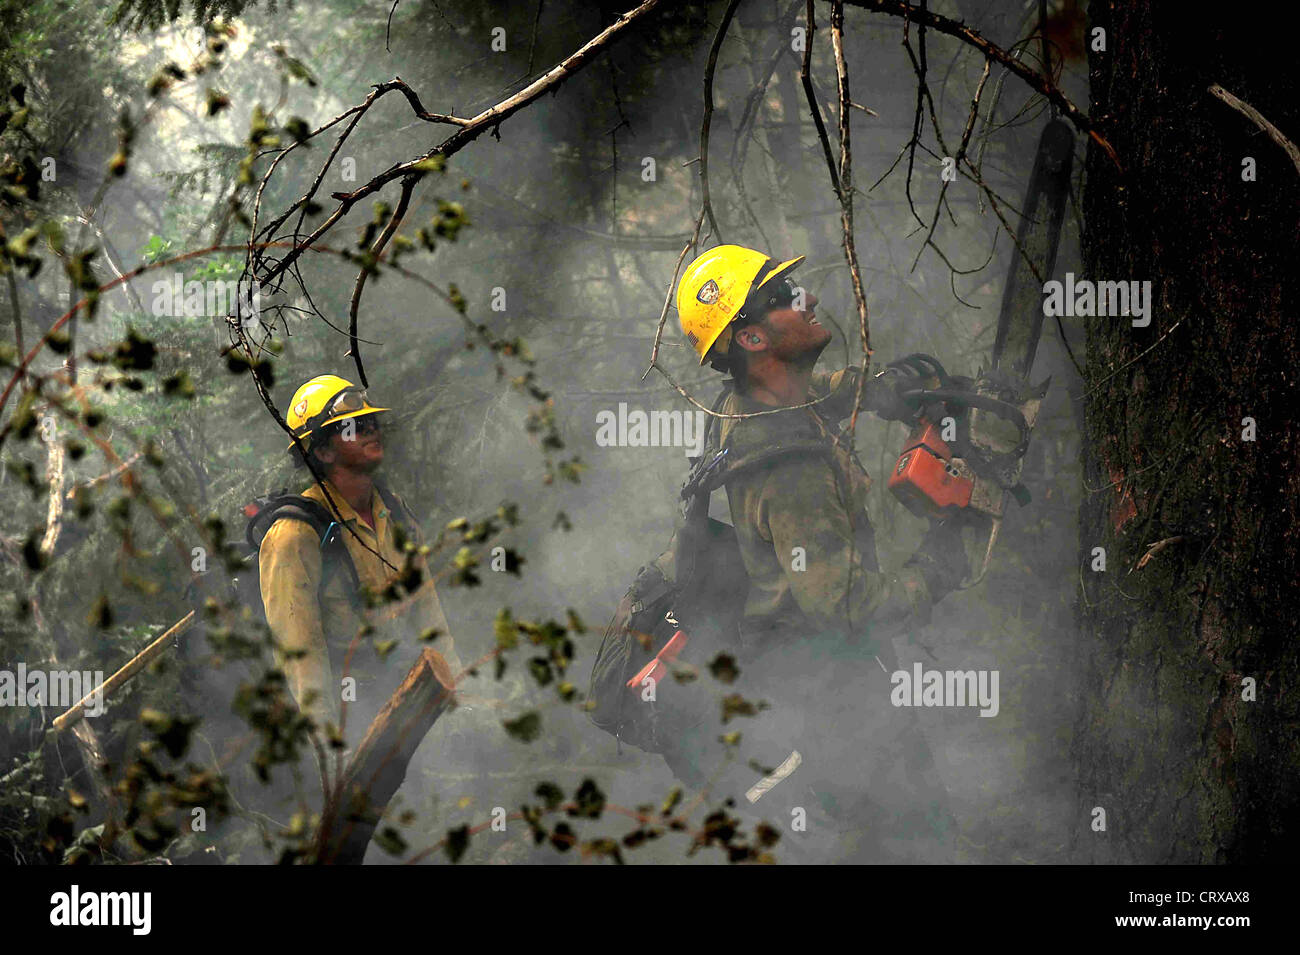 A US Forest Service Hot Shot firefighter crew cuts a tree with a chainsaw to clear a fire line to slow the Waldo Canyon wild fire in the Mount St. Francis June 28, 2012 in Colorado Springs, CO. Stock Photo